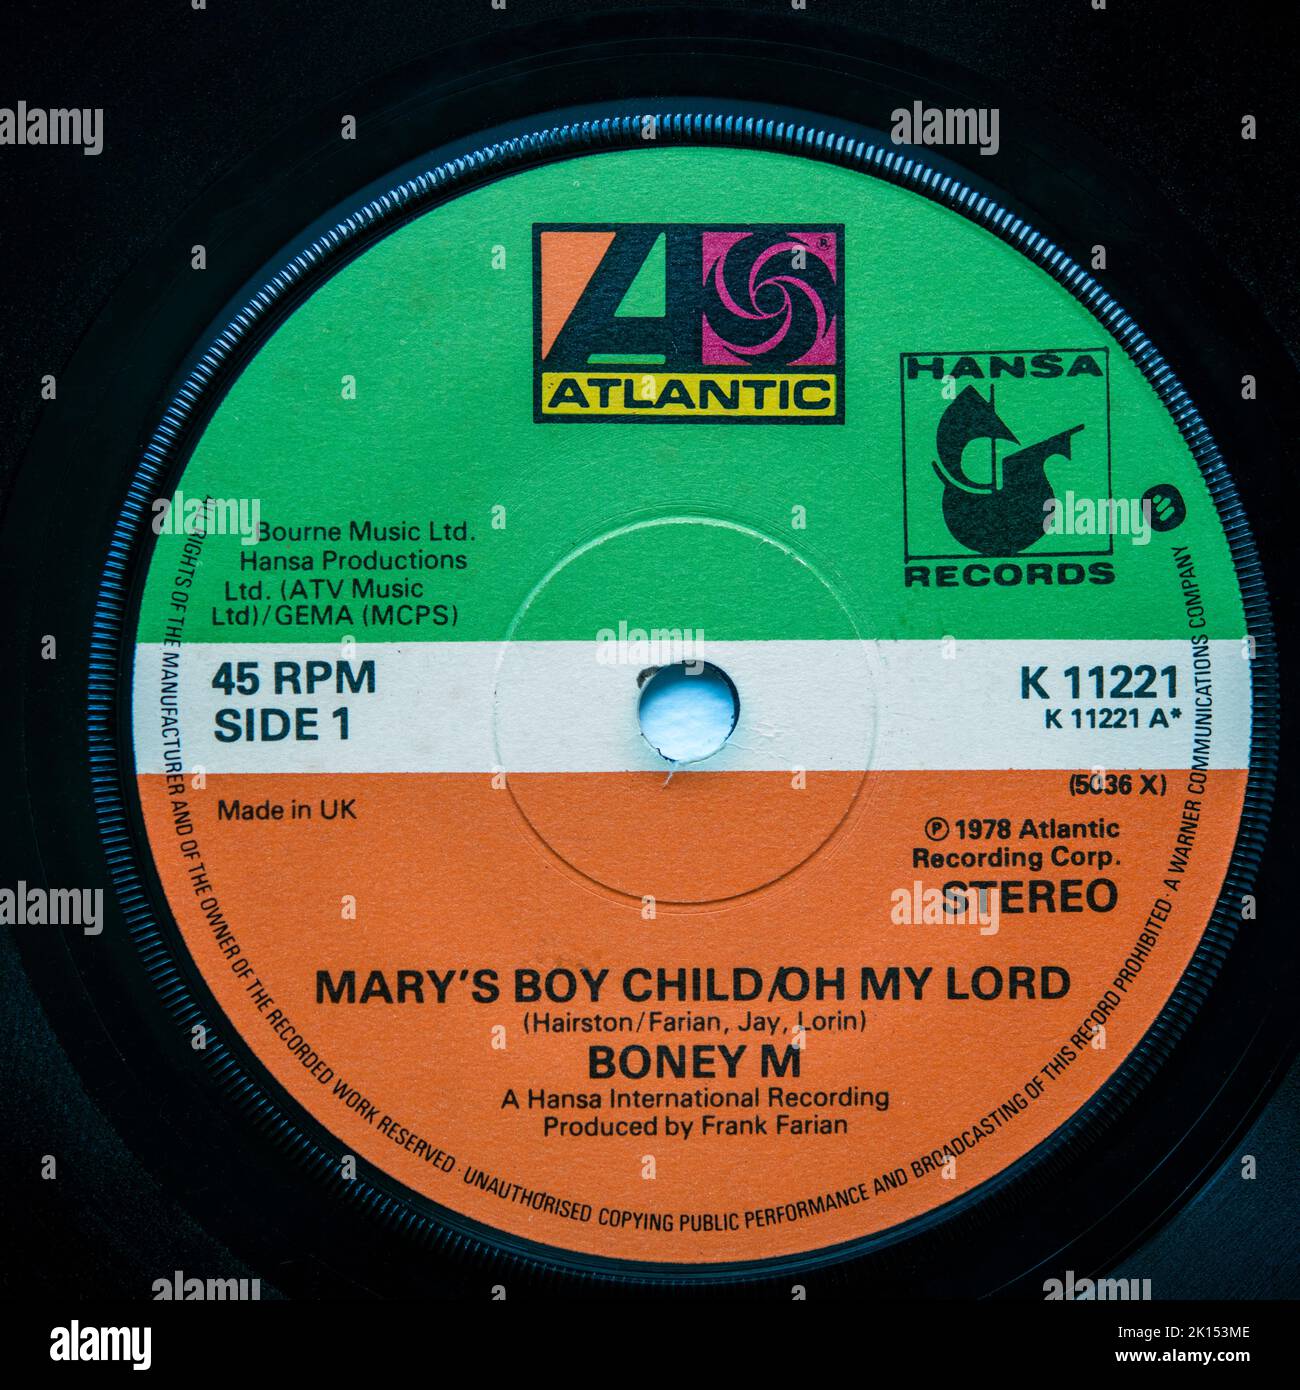 Detail of the label of the 1978 Christmas single Mary's Boy Child (Oh My Lord) by Boney M. Stock Photo